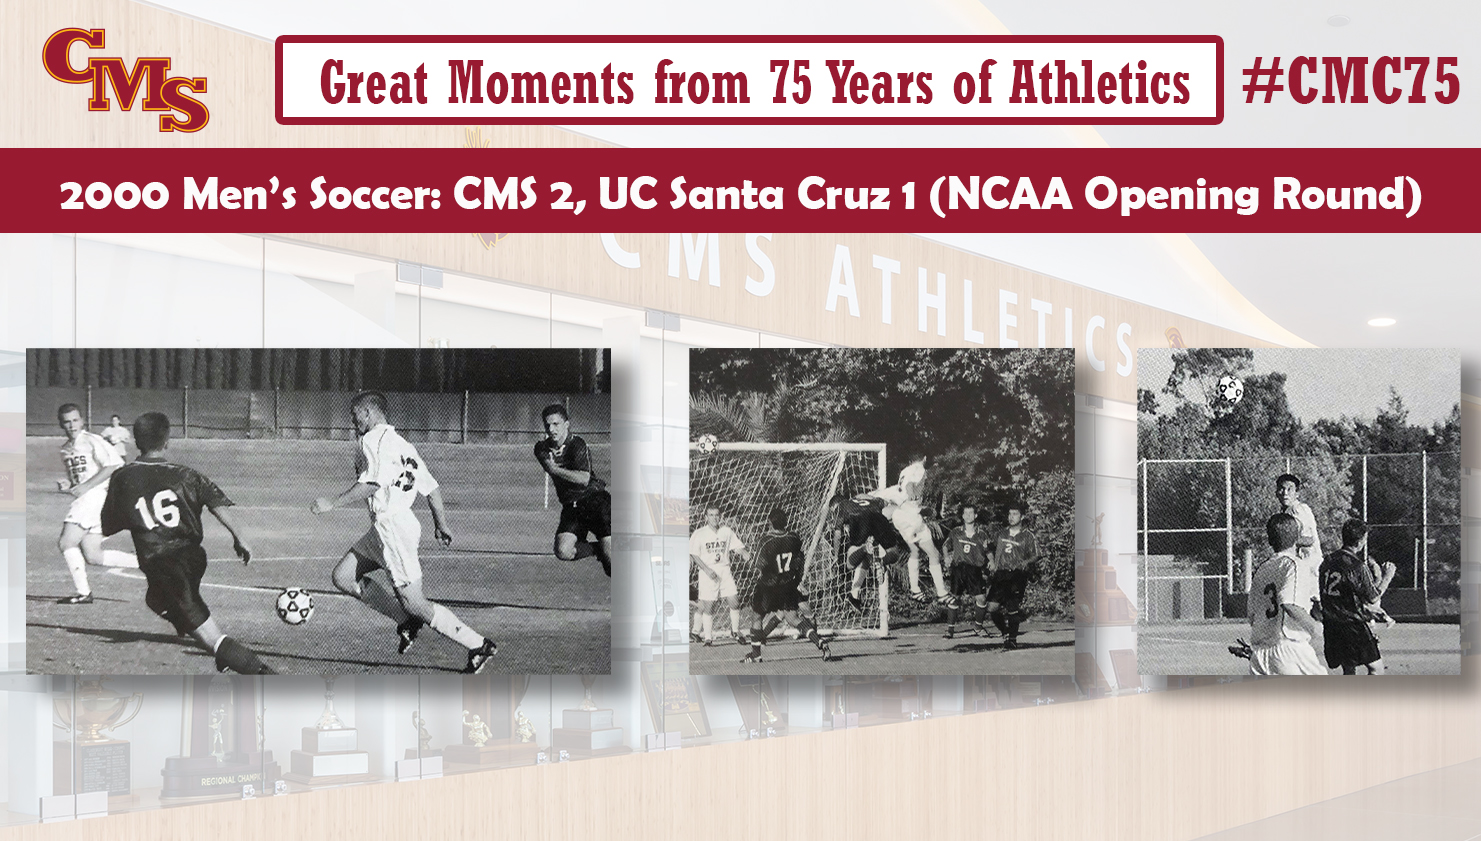 Action shots from the 2000 team. Words over the photo read: Great Moments from 75 Years of Athletics. 2000 Men's Soccer: CMS 2, UC Santa Cruz 1 (NCAA Opening Round)